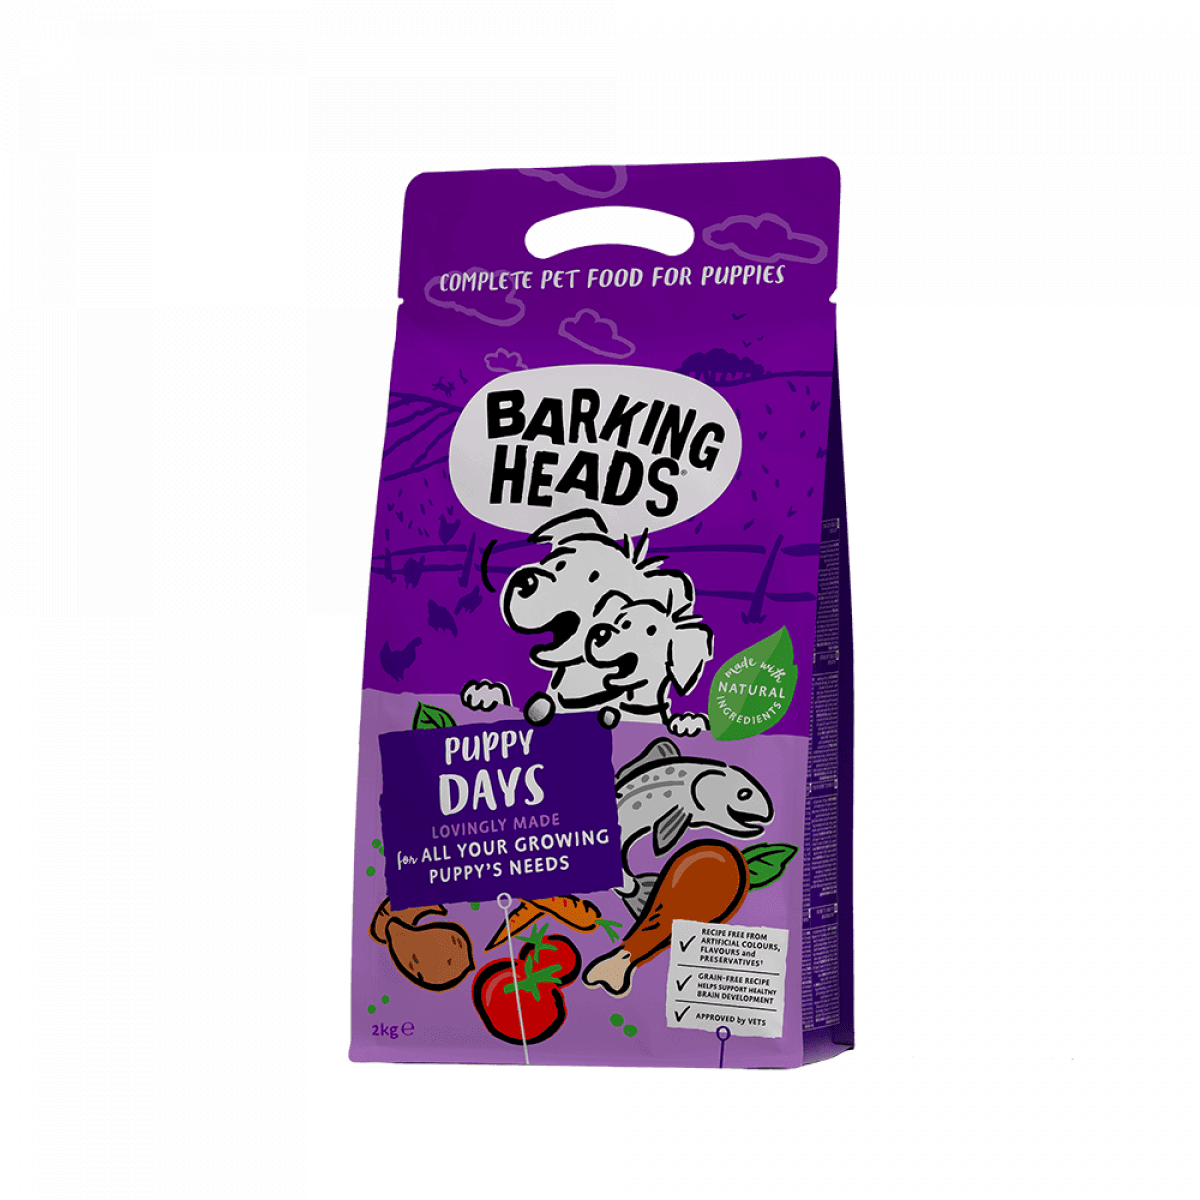 Barking Heads Puppy Days 2kg – Pawfect Supplies Ltd Product Image